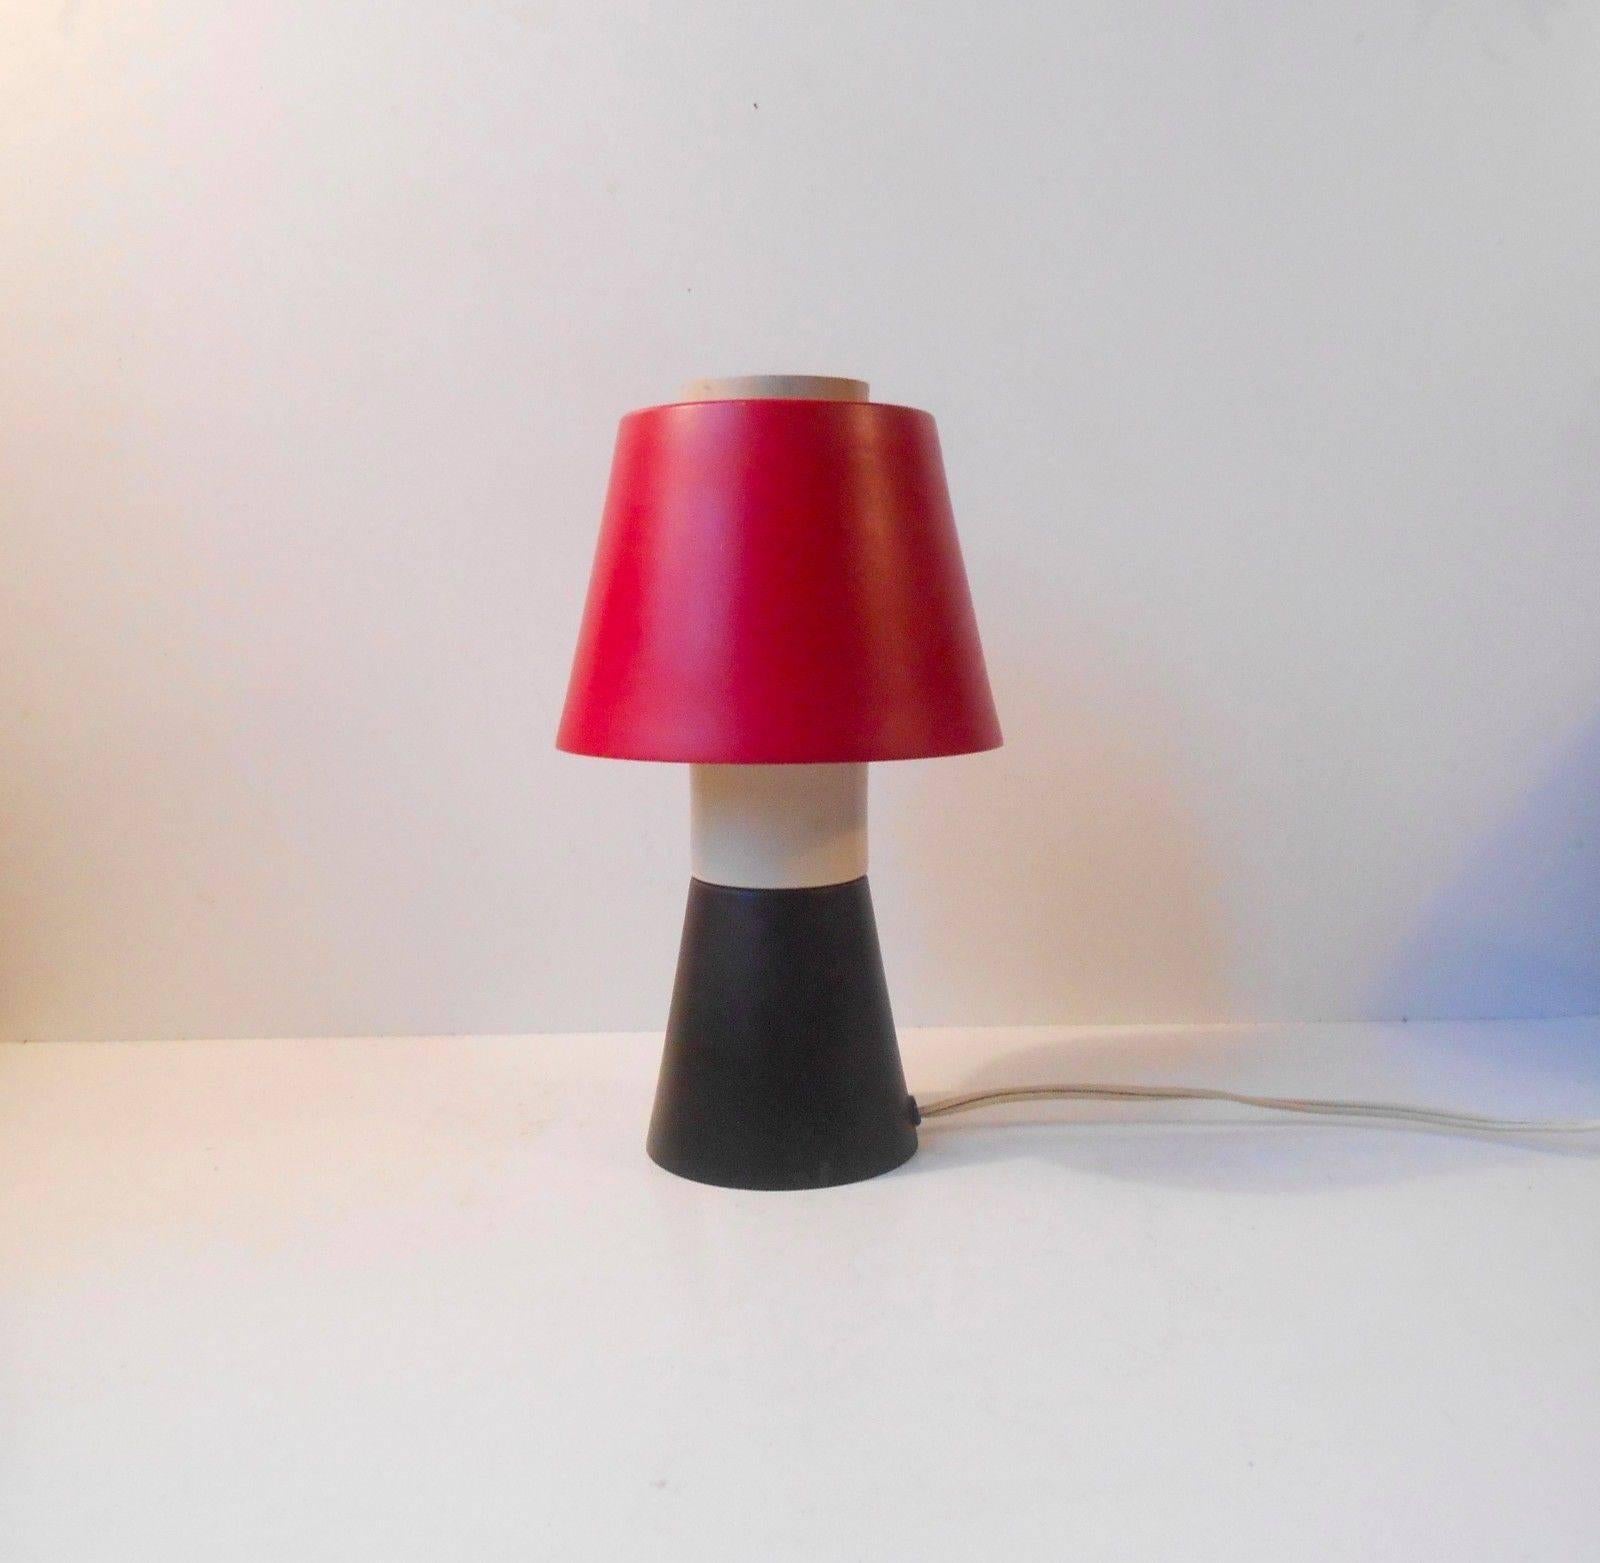 Measurements and info:

Type: Desk or table lamp.

Origin: Denmark.

Maker: Voss

Designer: Ernest Voss

Design period: early 1950s.

Height approx: 23 cm (9 inches).

Shade diameter: Approximate 16 cm (5.5 inches).

Material/color: Matte black, red